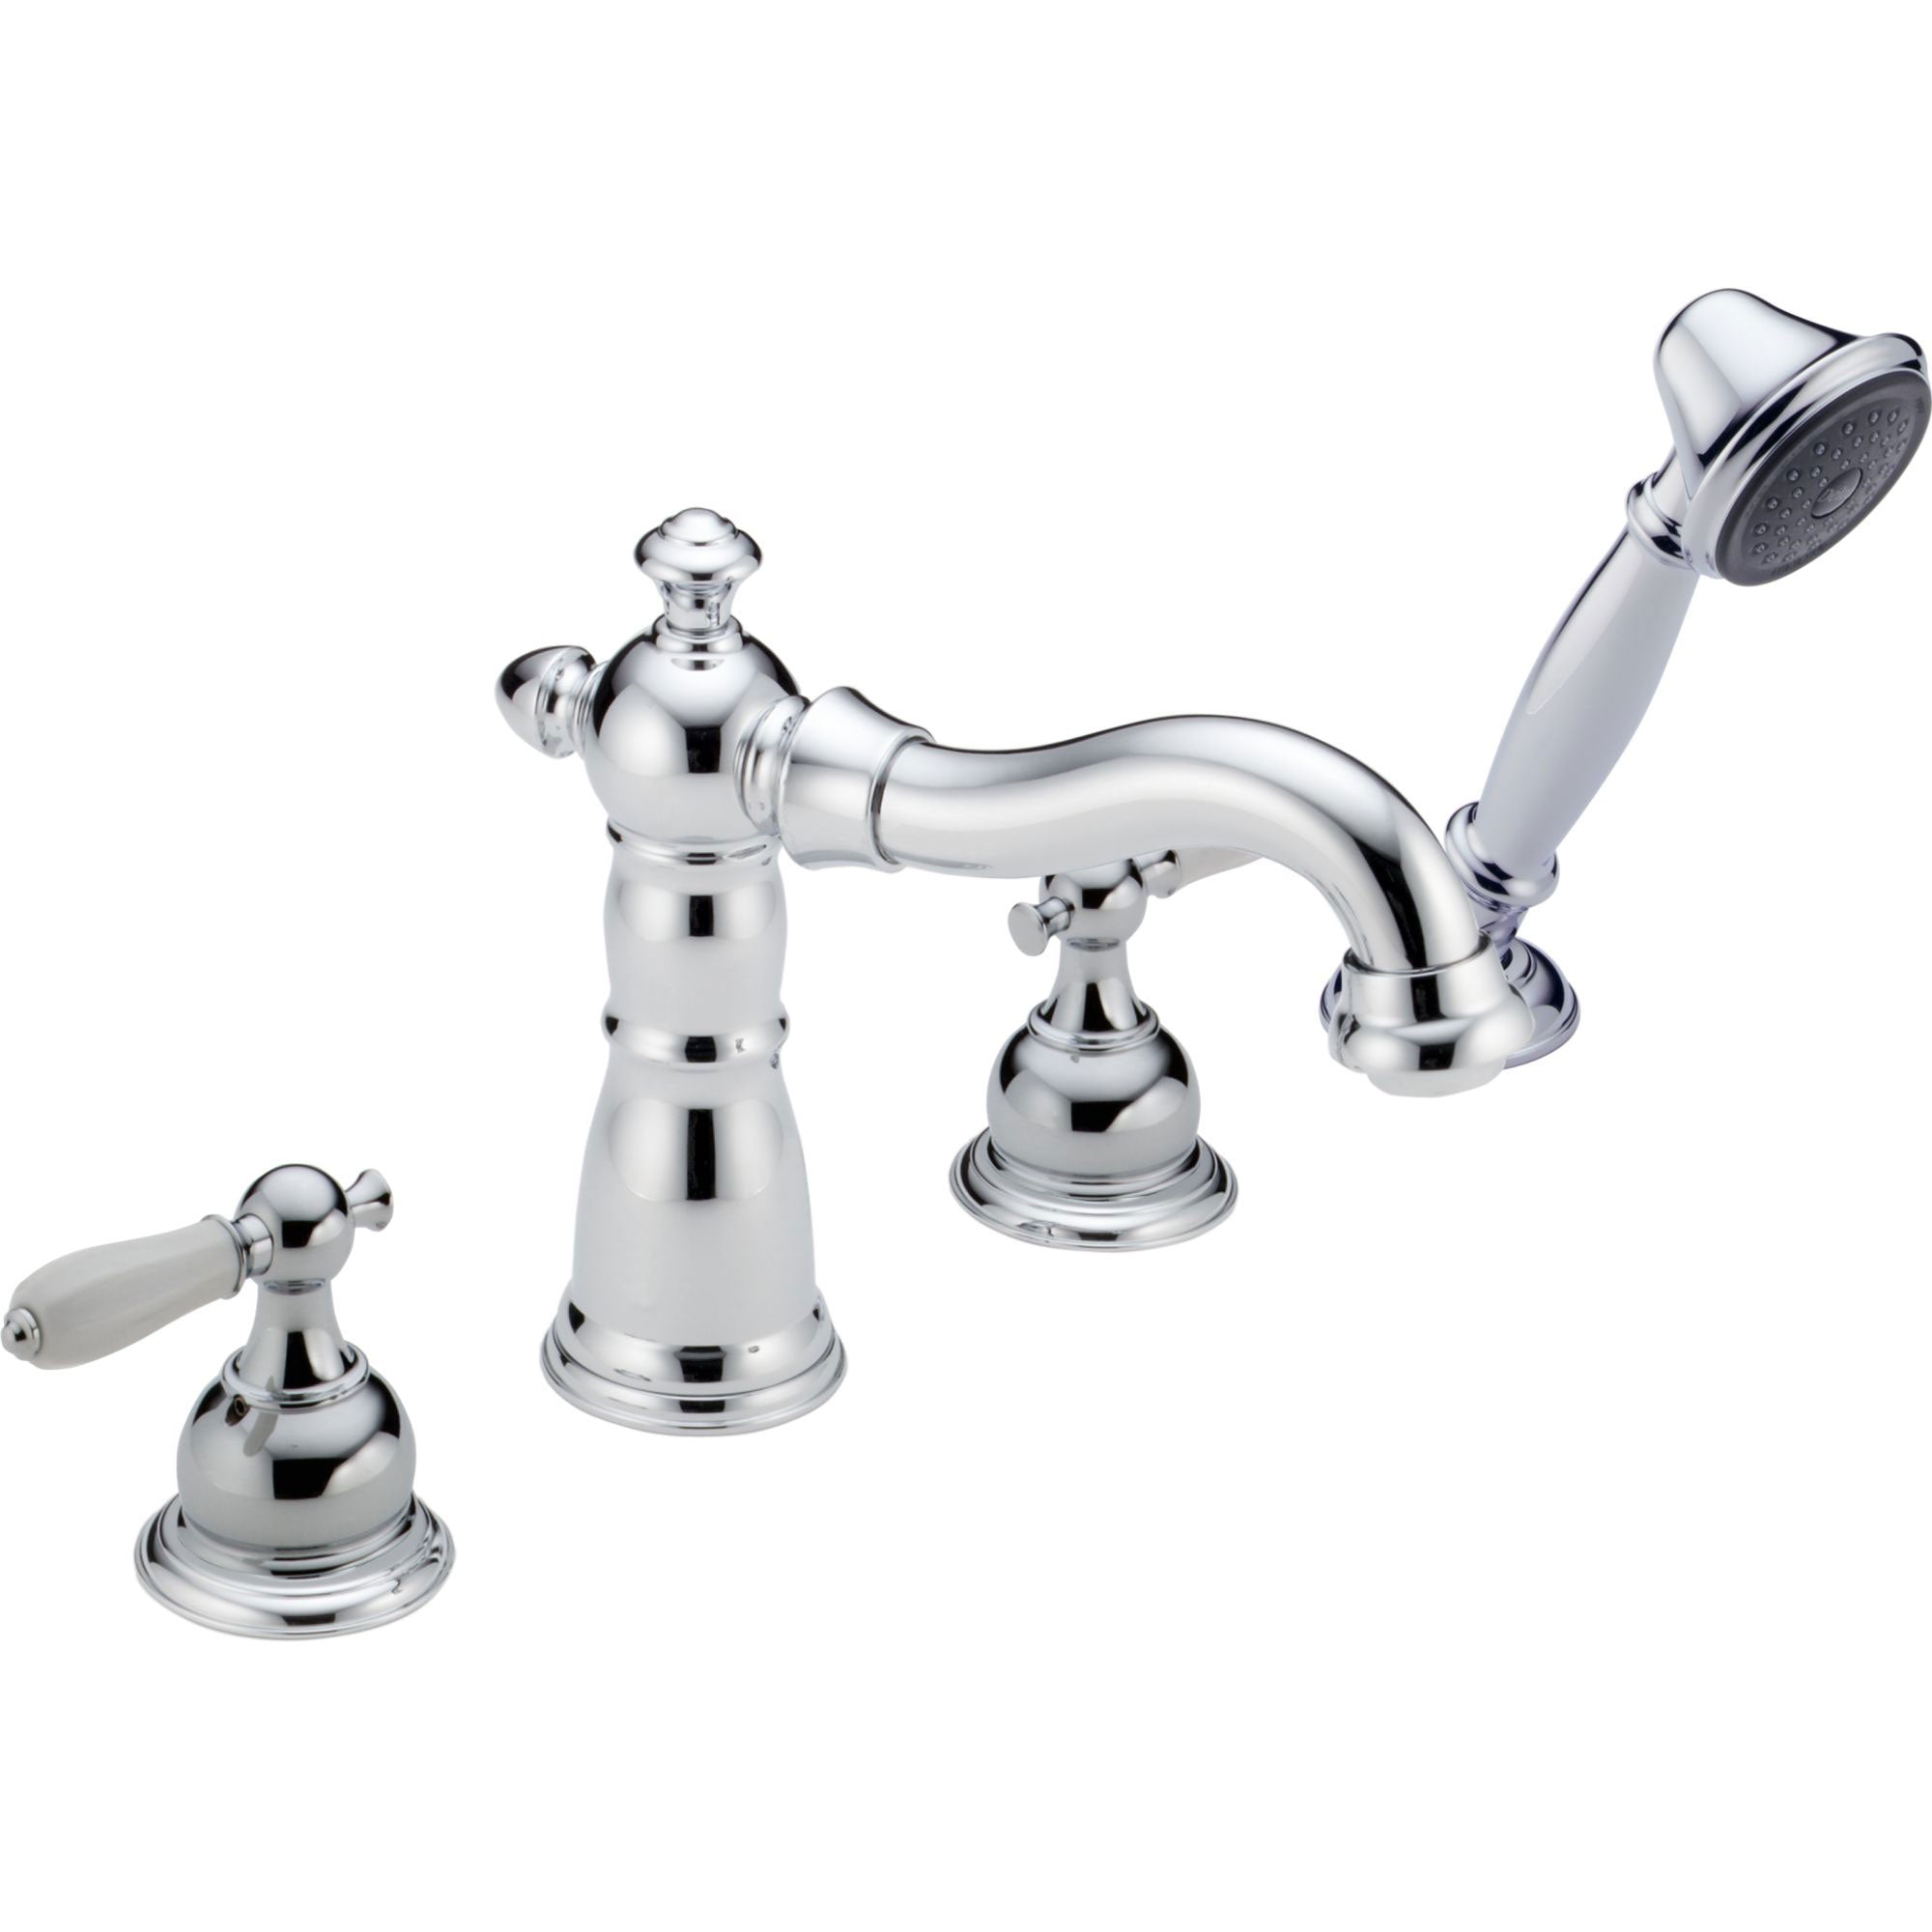 Delta Victorian Chrome Roman Tub Filler Faucet with Hand Shower Spray INCLUDES Valve and White Lever Handles D1076V